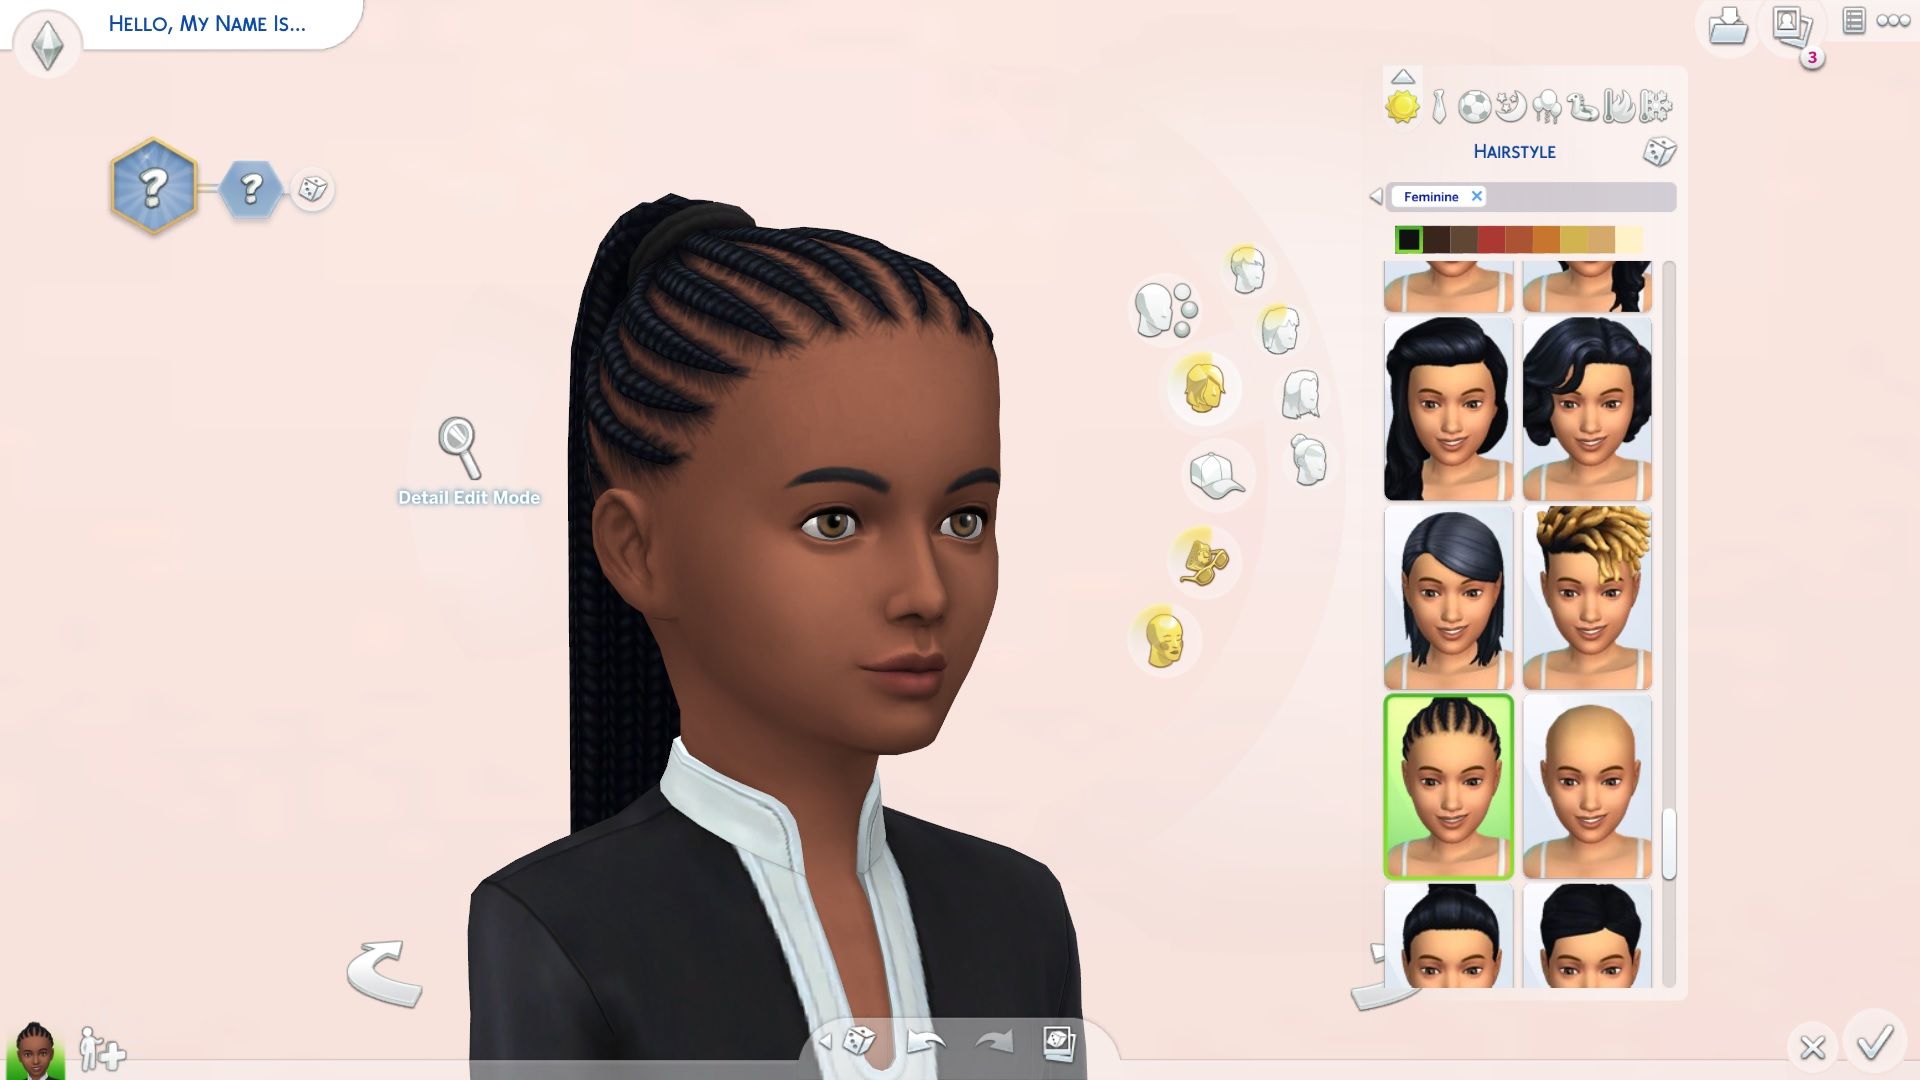 The Sims 4 Free Update Adds 100+ New Skin Tones